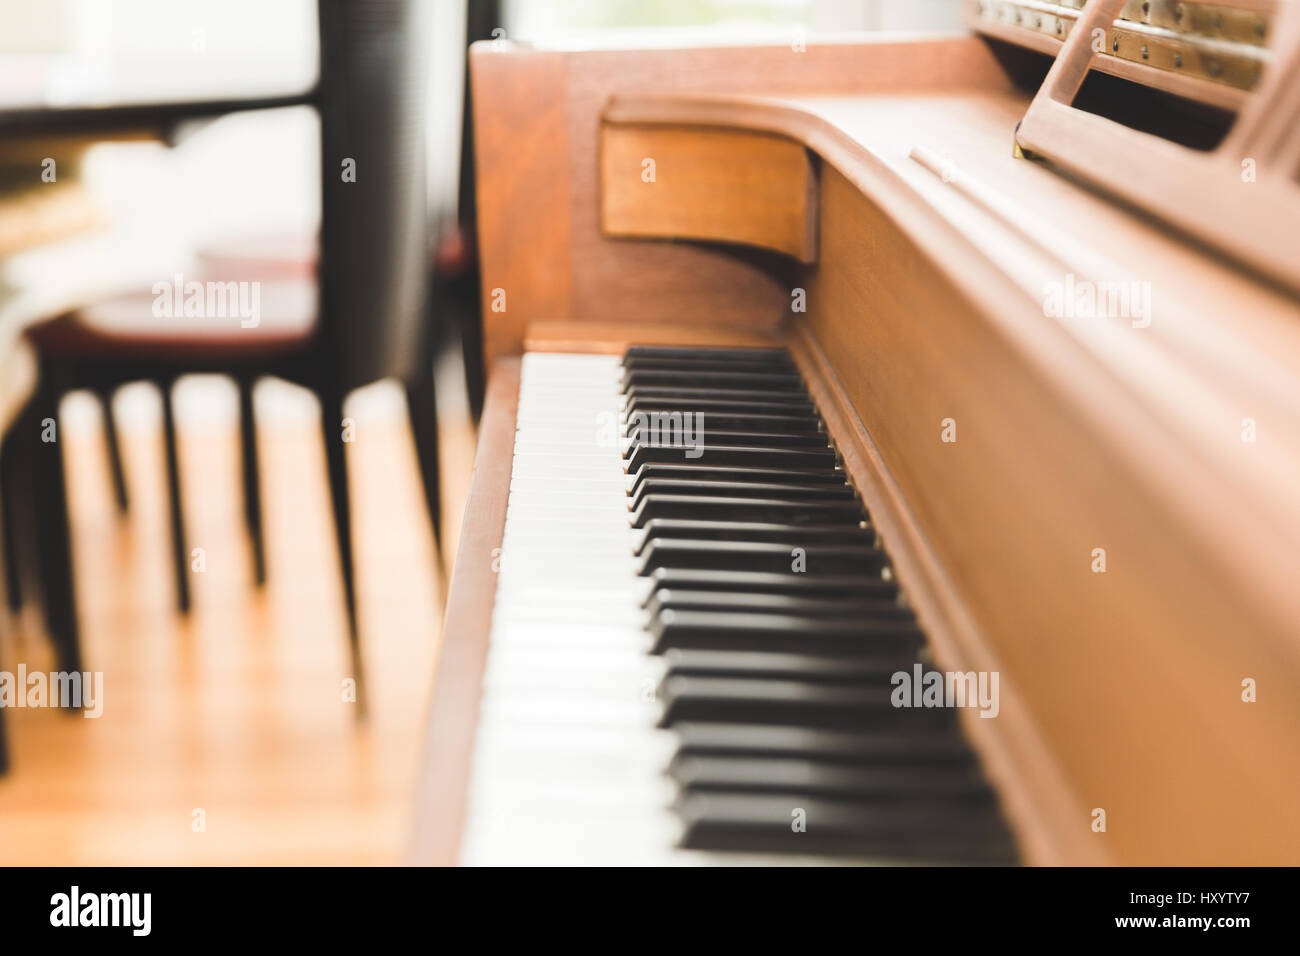 Black and white piano keys on a wooden upright piano. Stock Photo